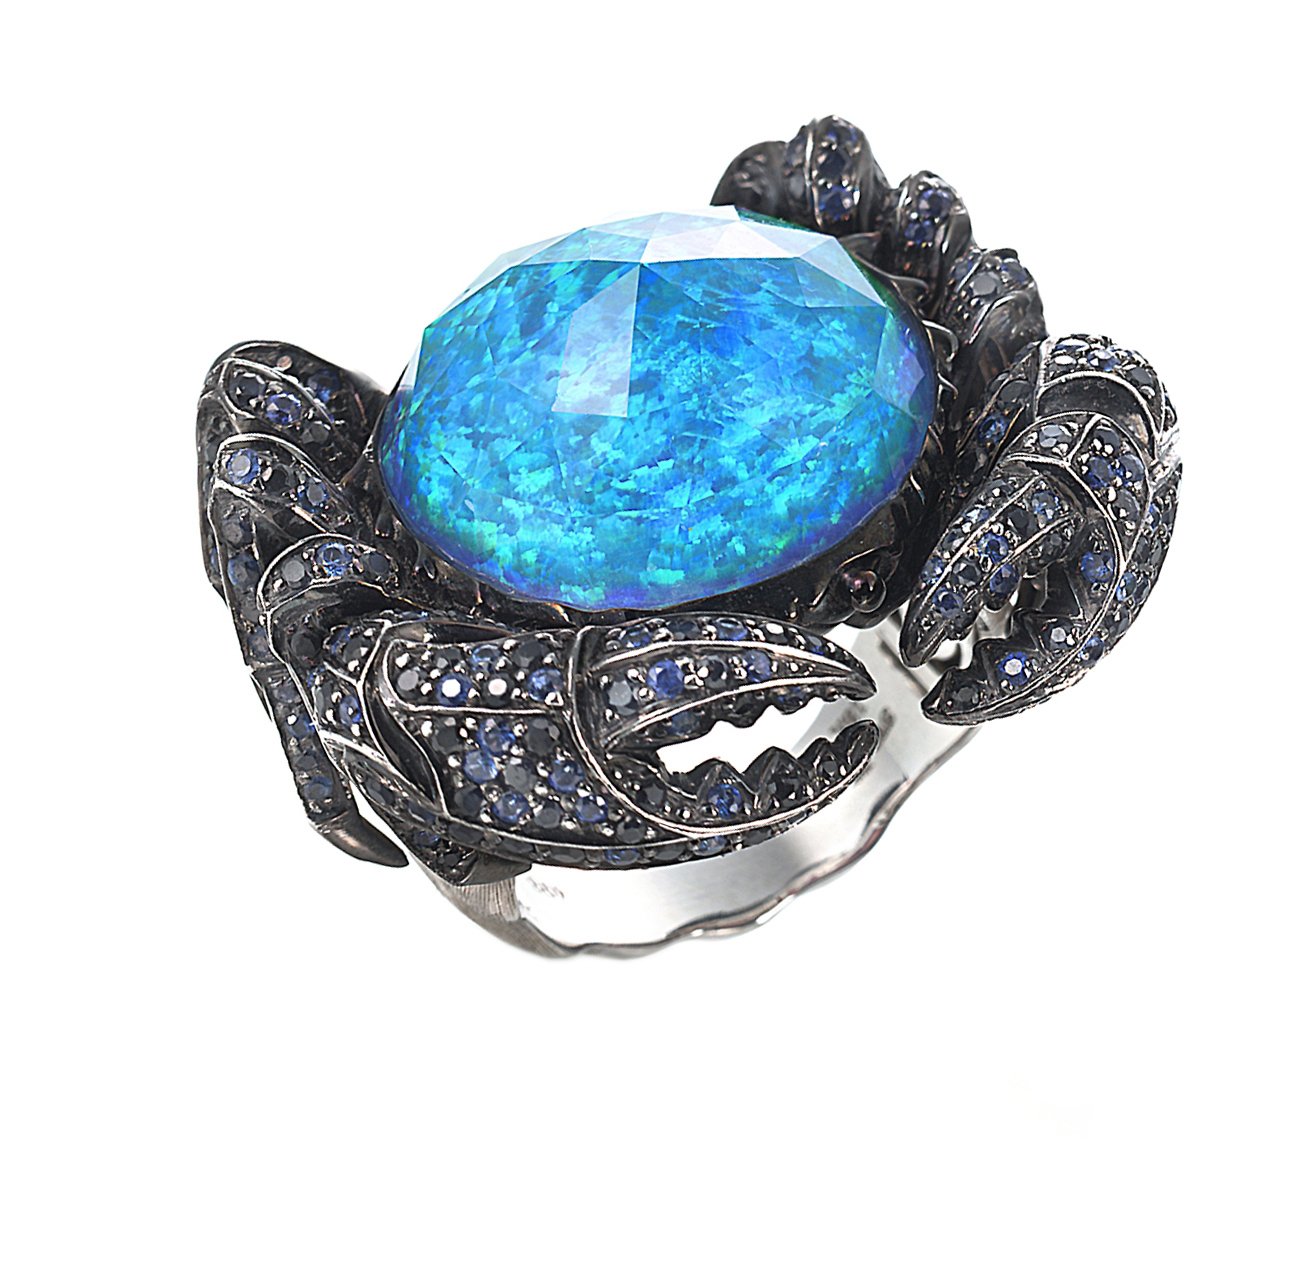 Jewels Verne CH2 Crab Ring with Black Opalescent, Blue Sapphires and Black Diamonds in 18kt White Gold - Size 7